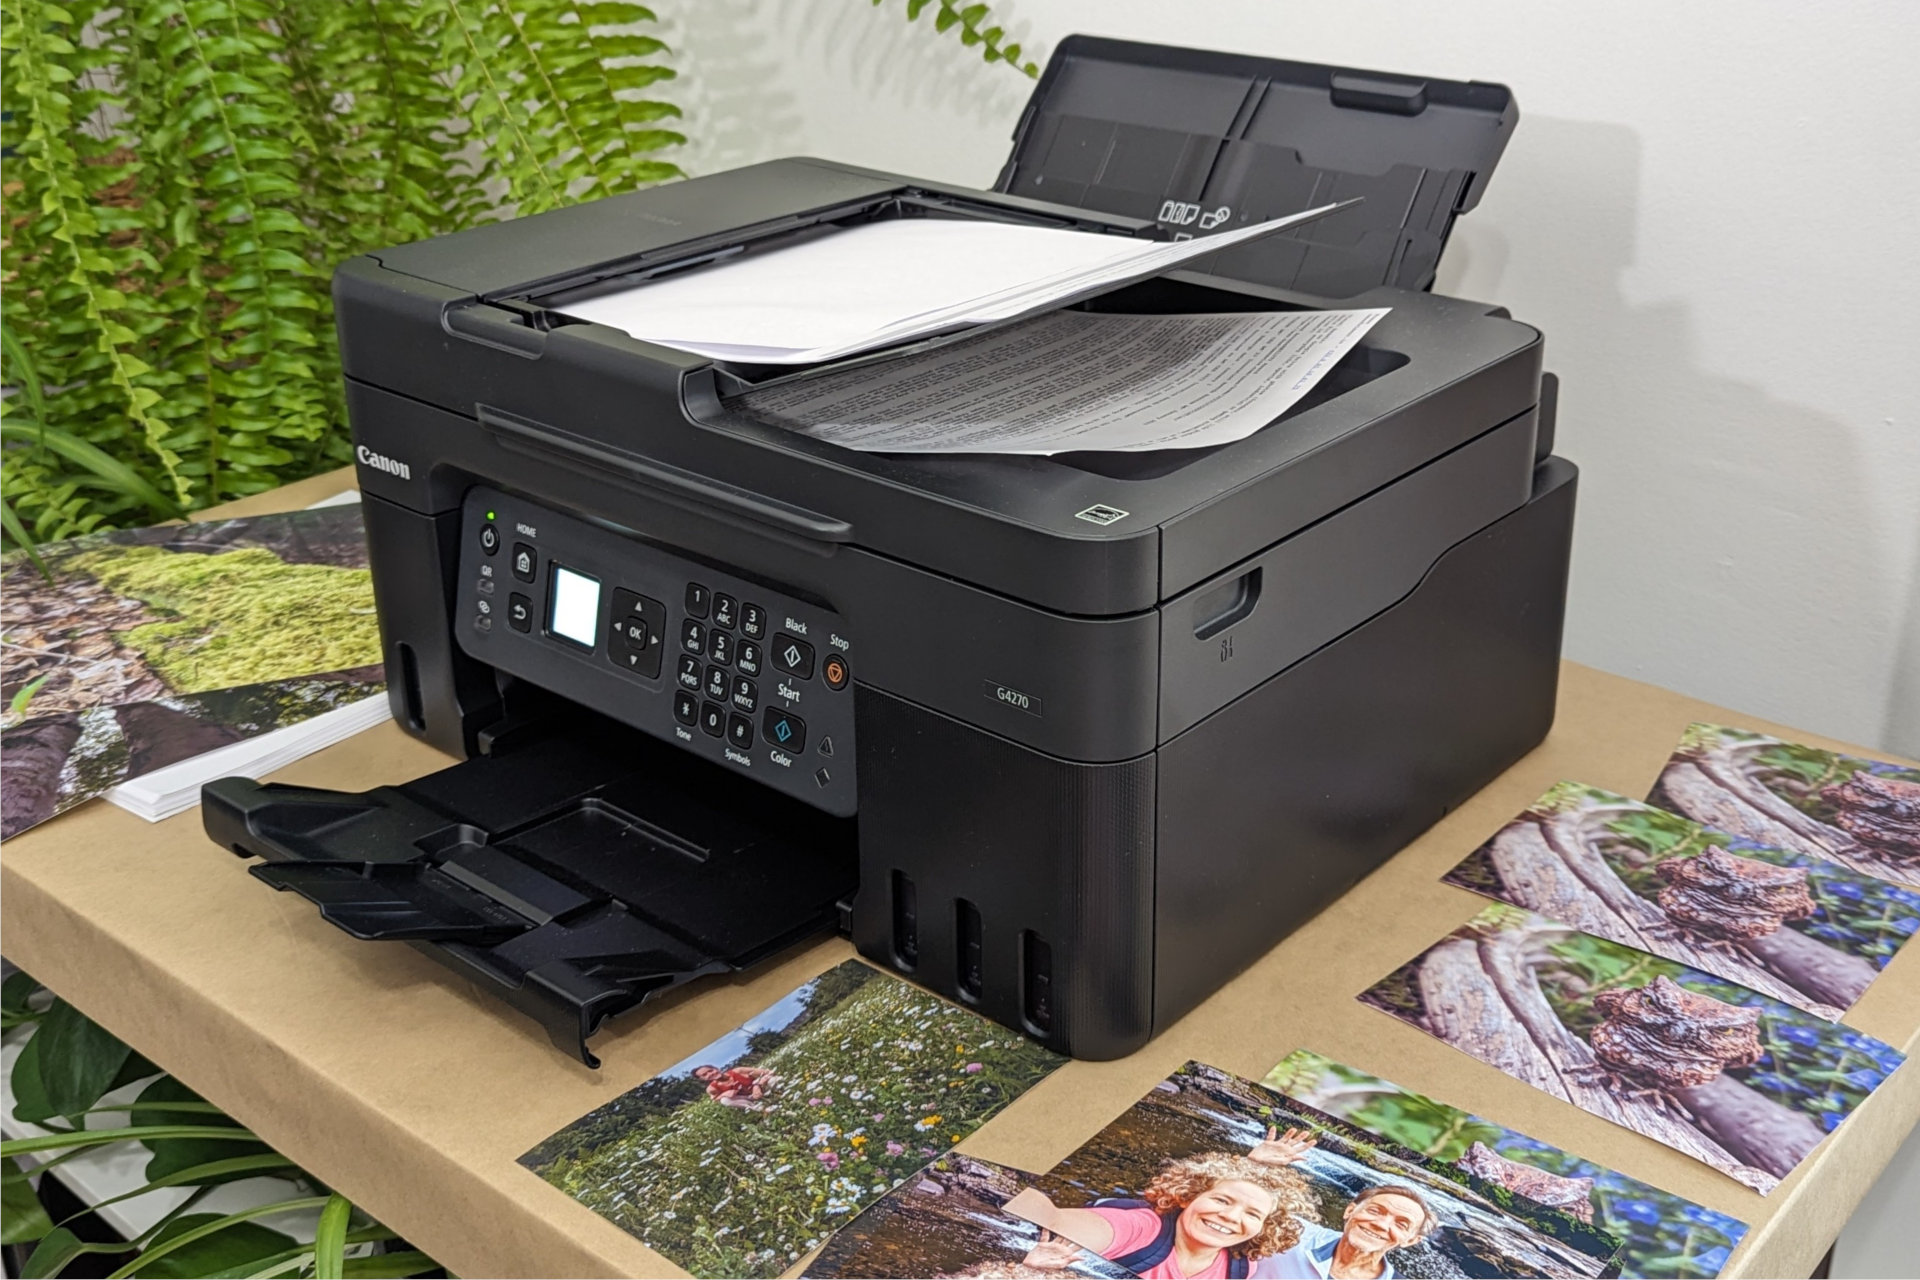 The Pixma G4270's document feeder stopped before scanning was complete.